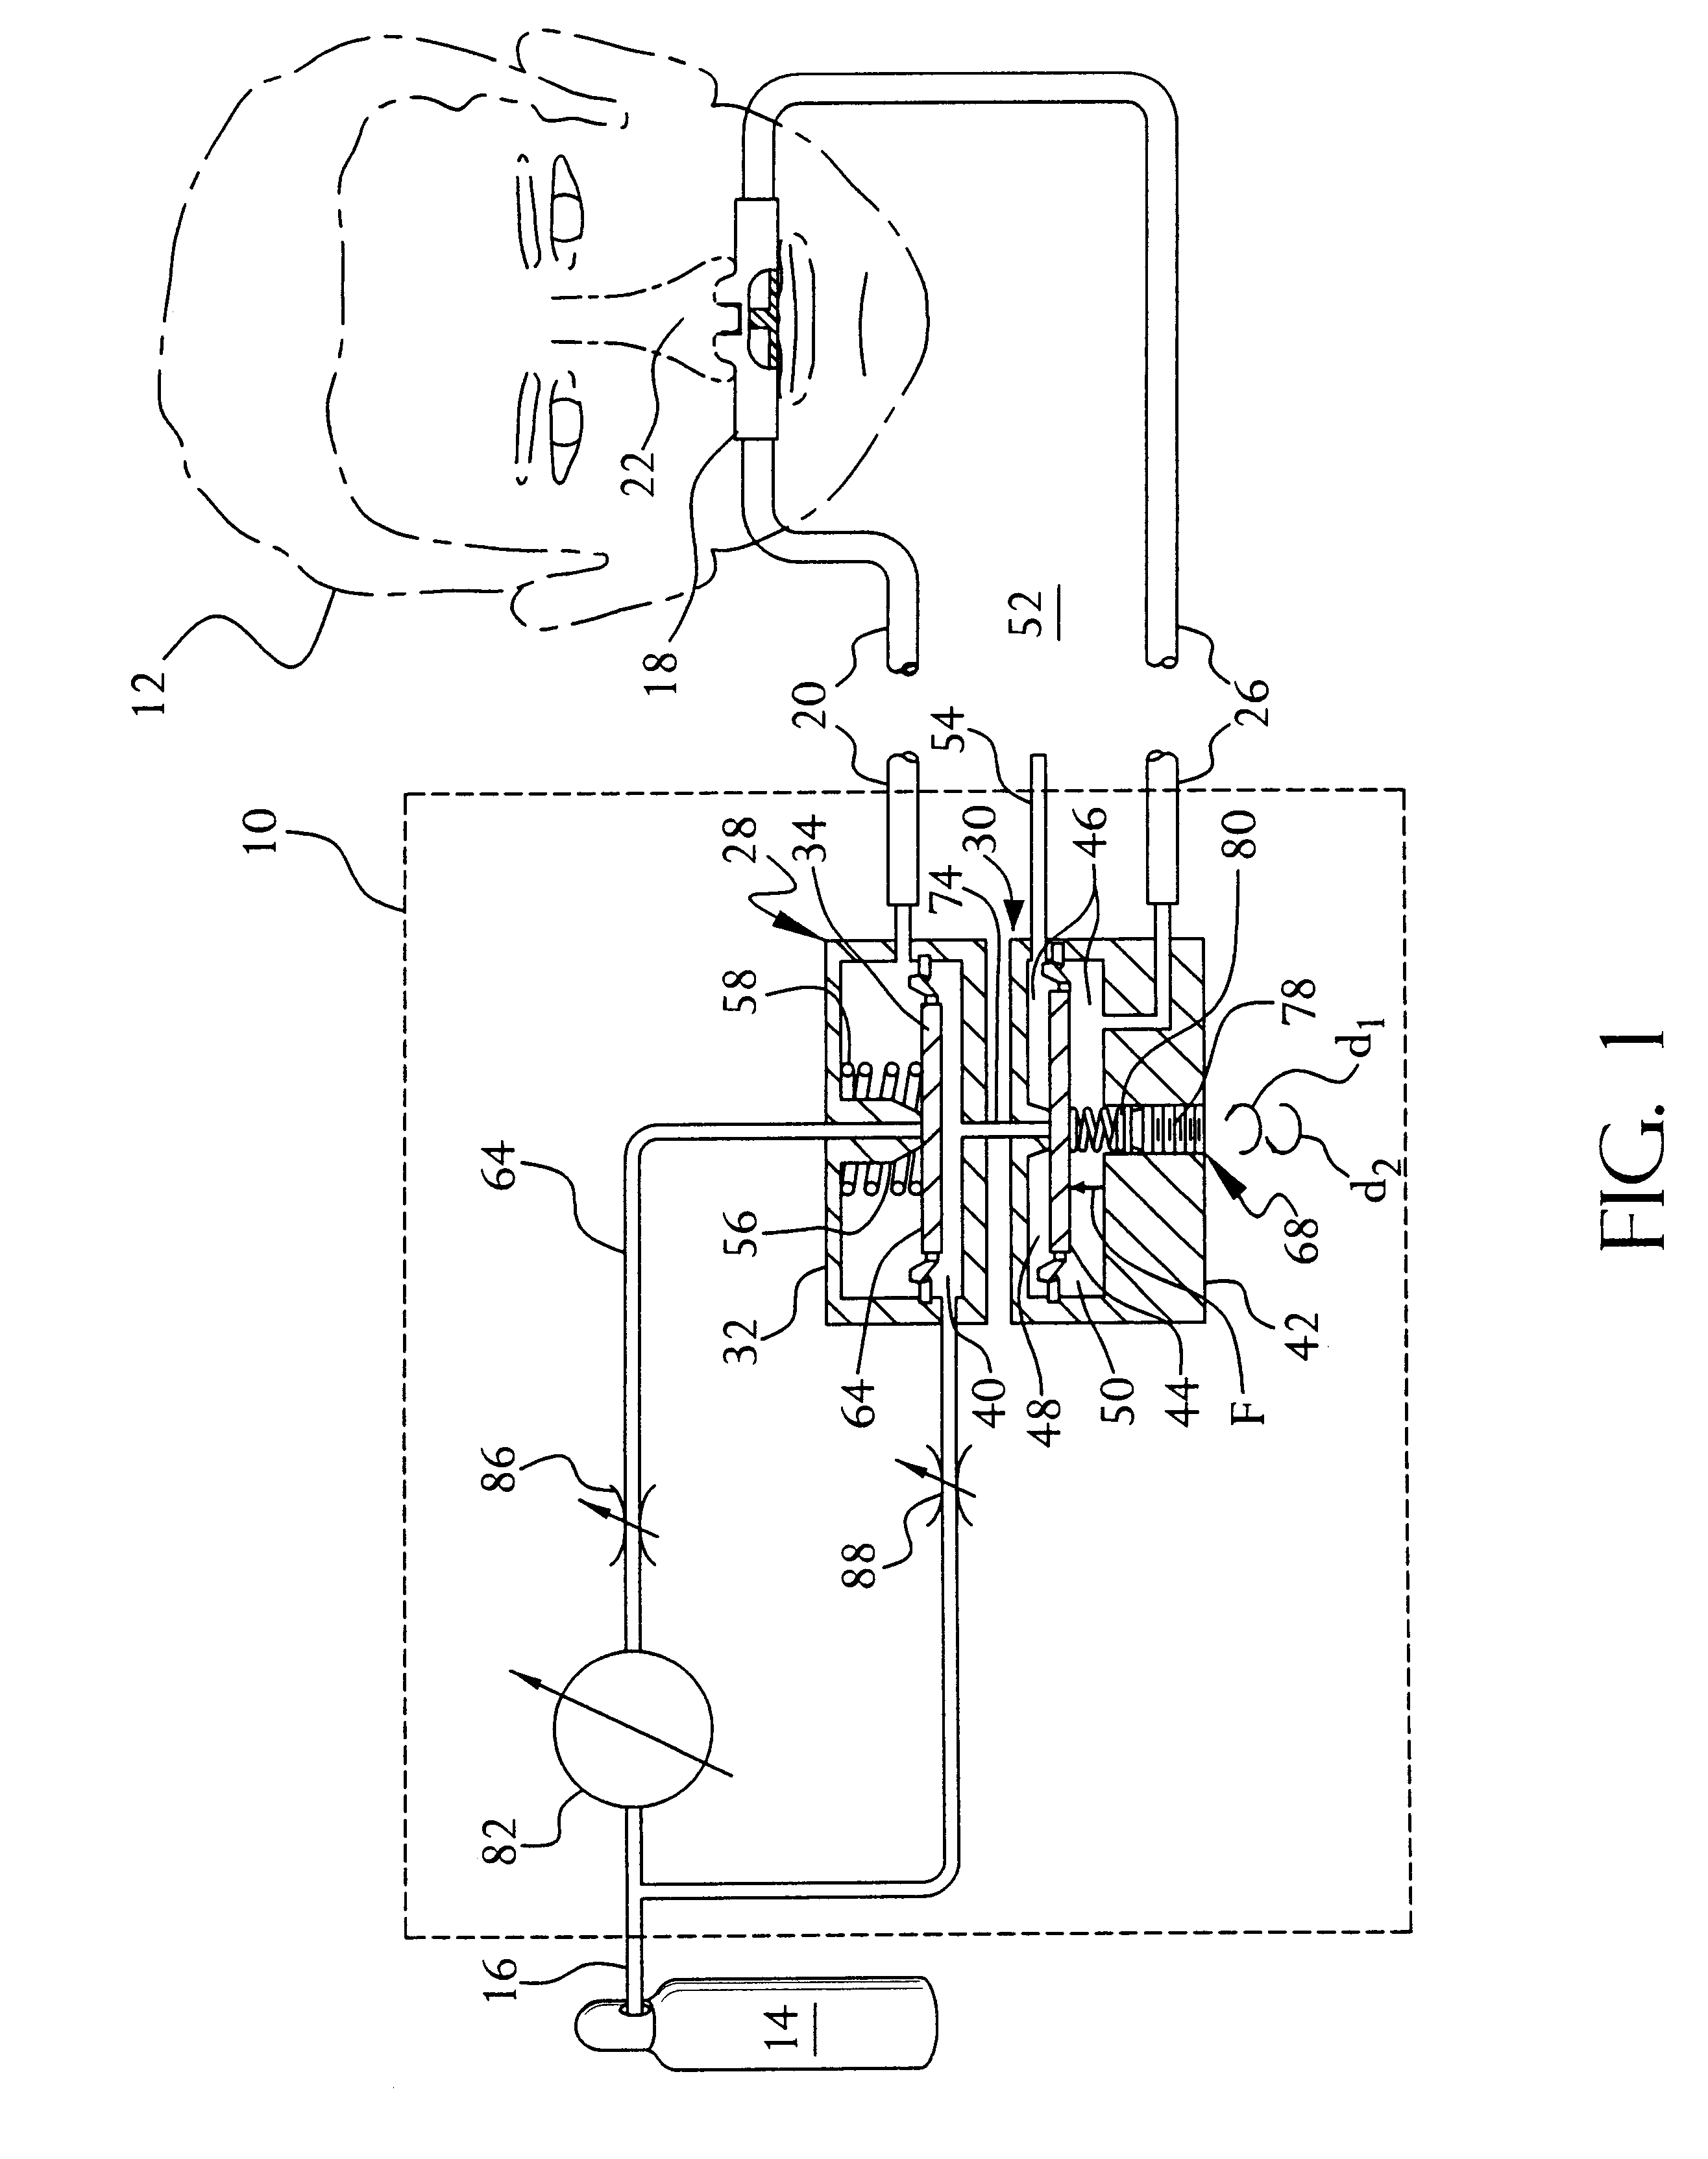 Supply valve and diaphragm for a pneumatically-operated gas demand apparatus